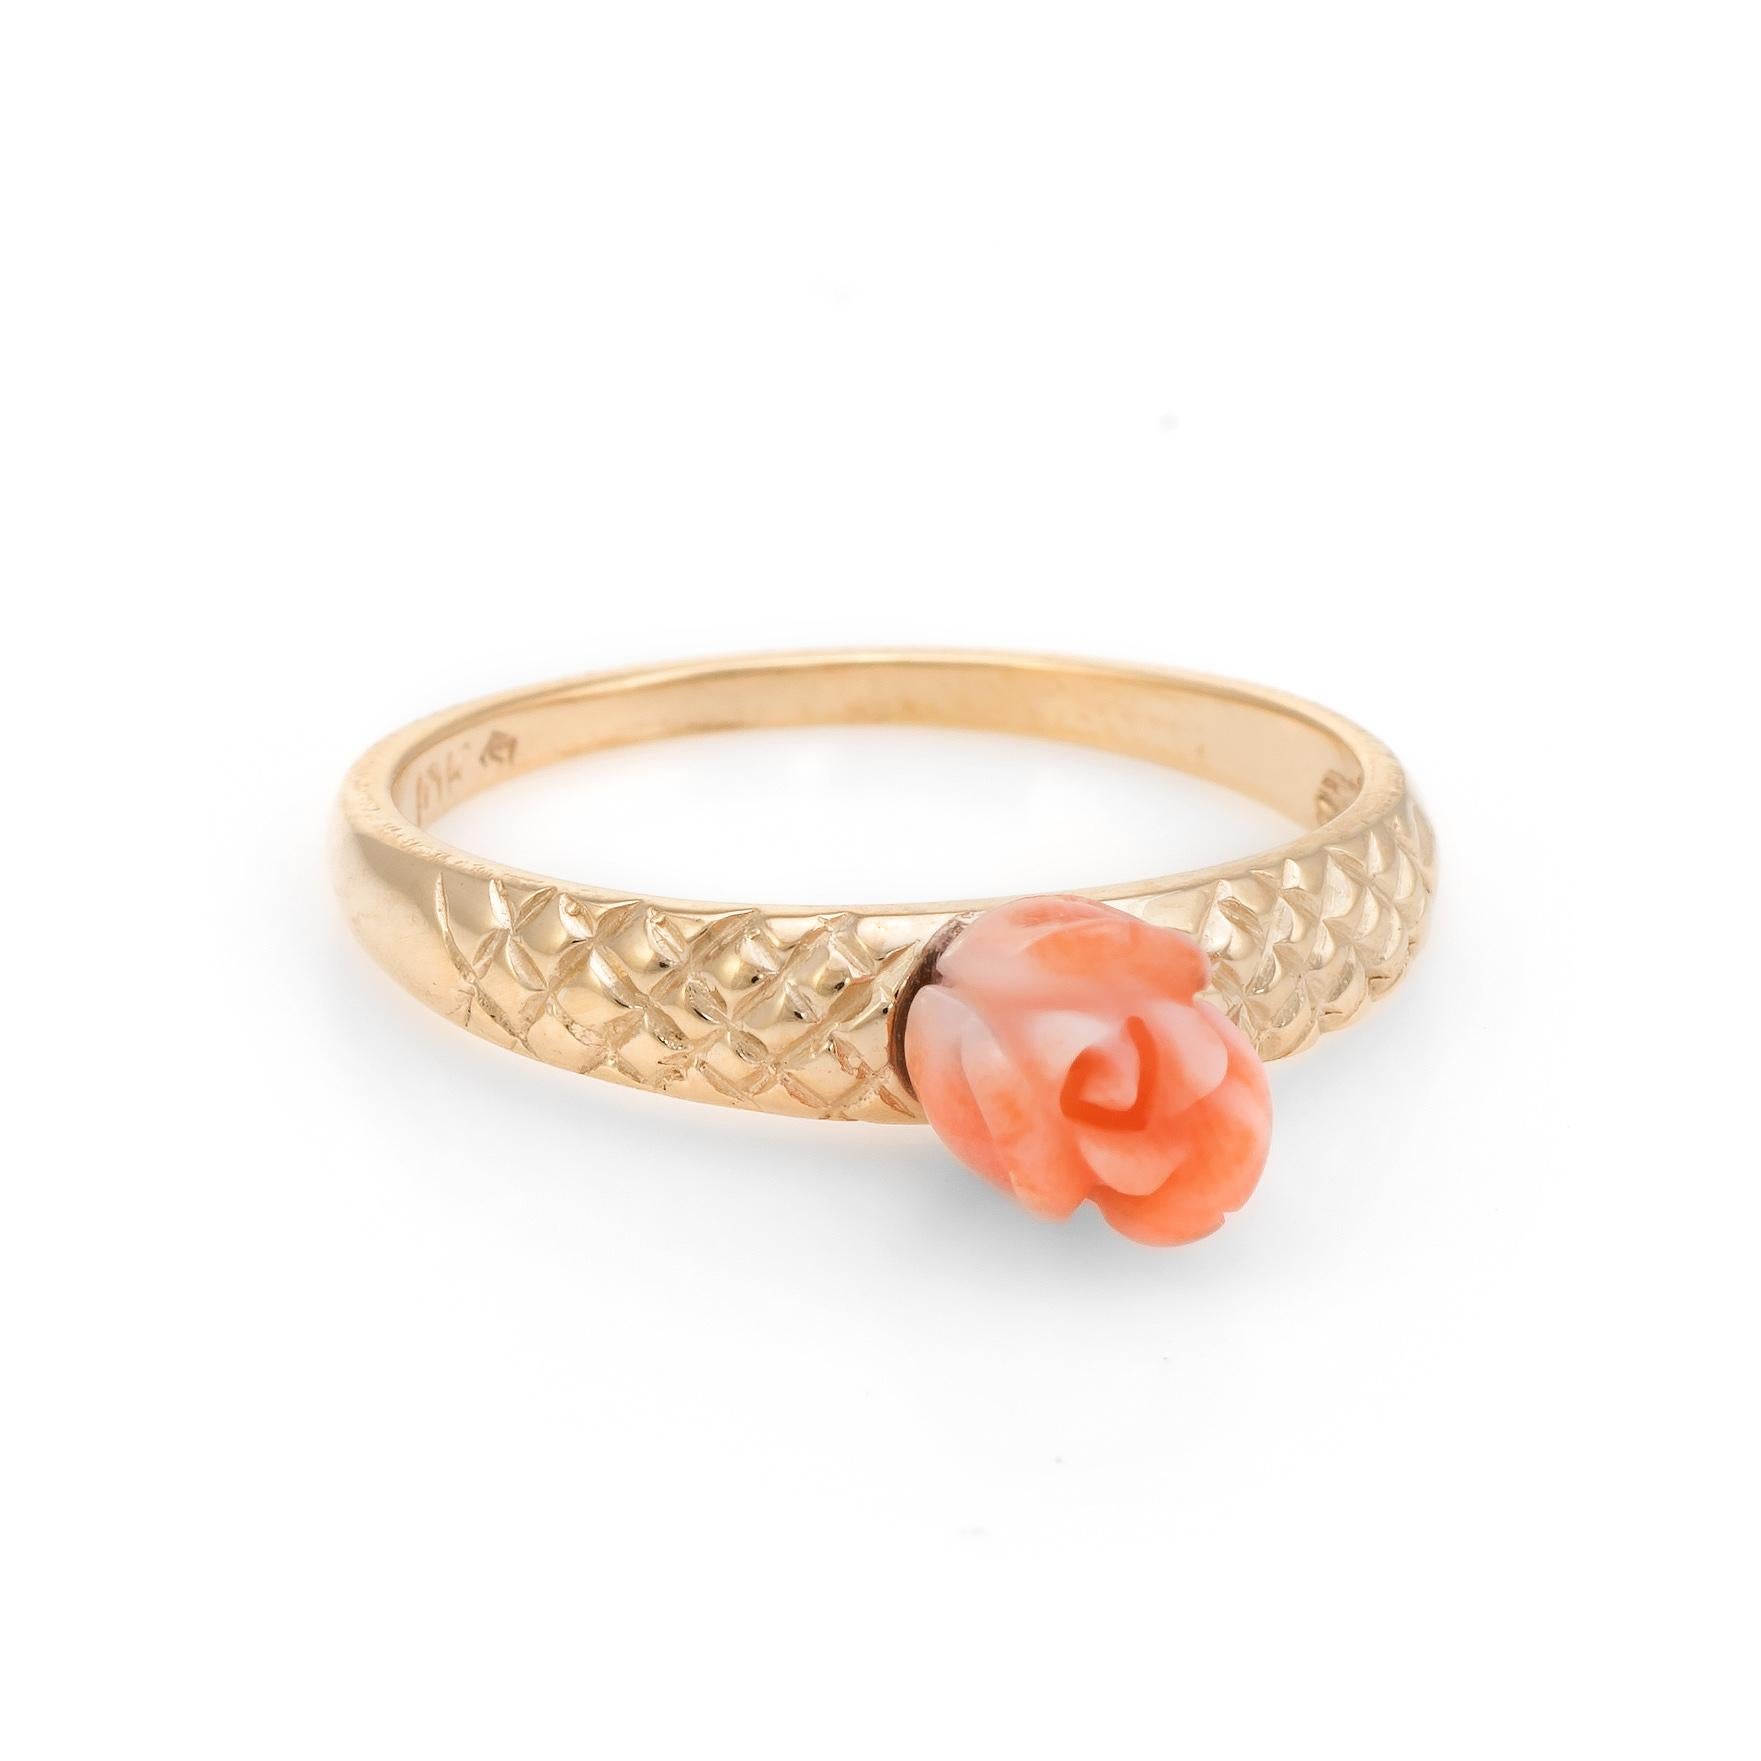 Finely detailed vintage stacking ring, crafted in 10 karat yellow gold. 

Coral is carved in the form of a rose, measuring 6.3mm. The coral is in excellent condition and free of cracks or chips.   

The ring is in excellent condition.